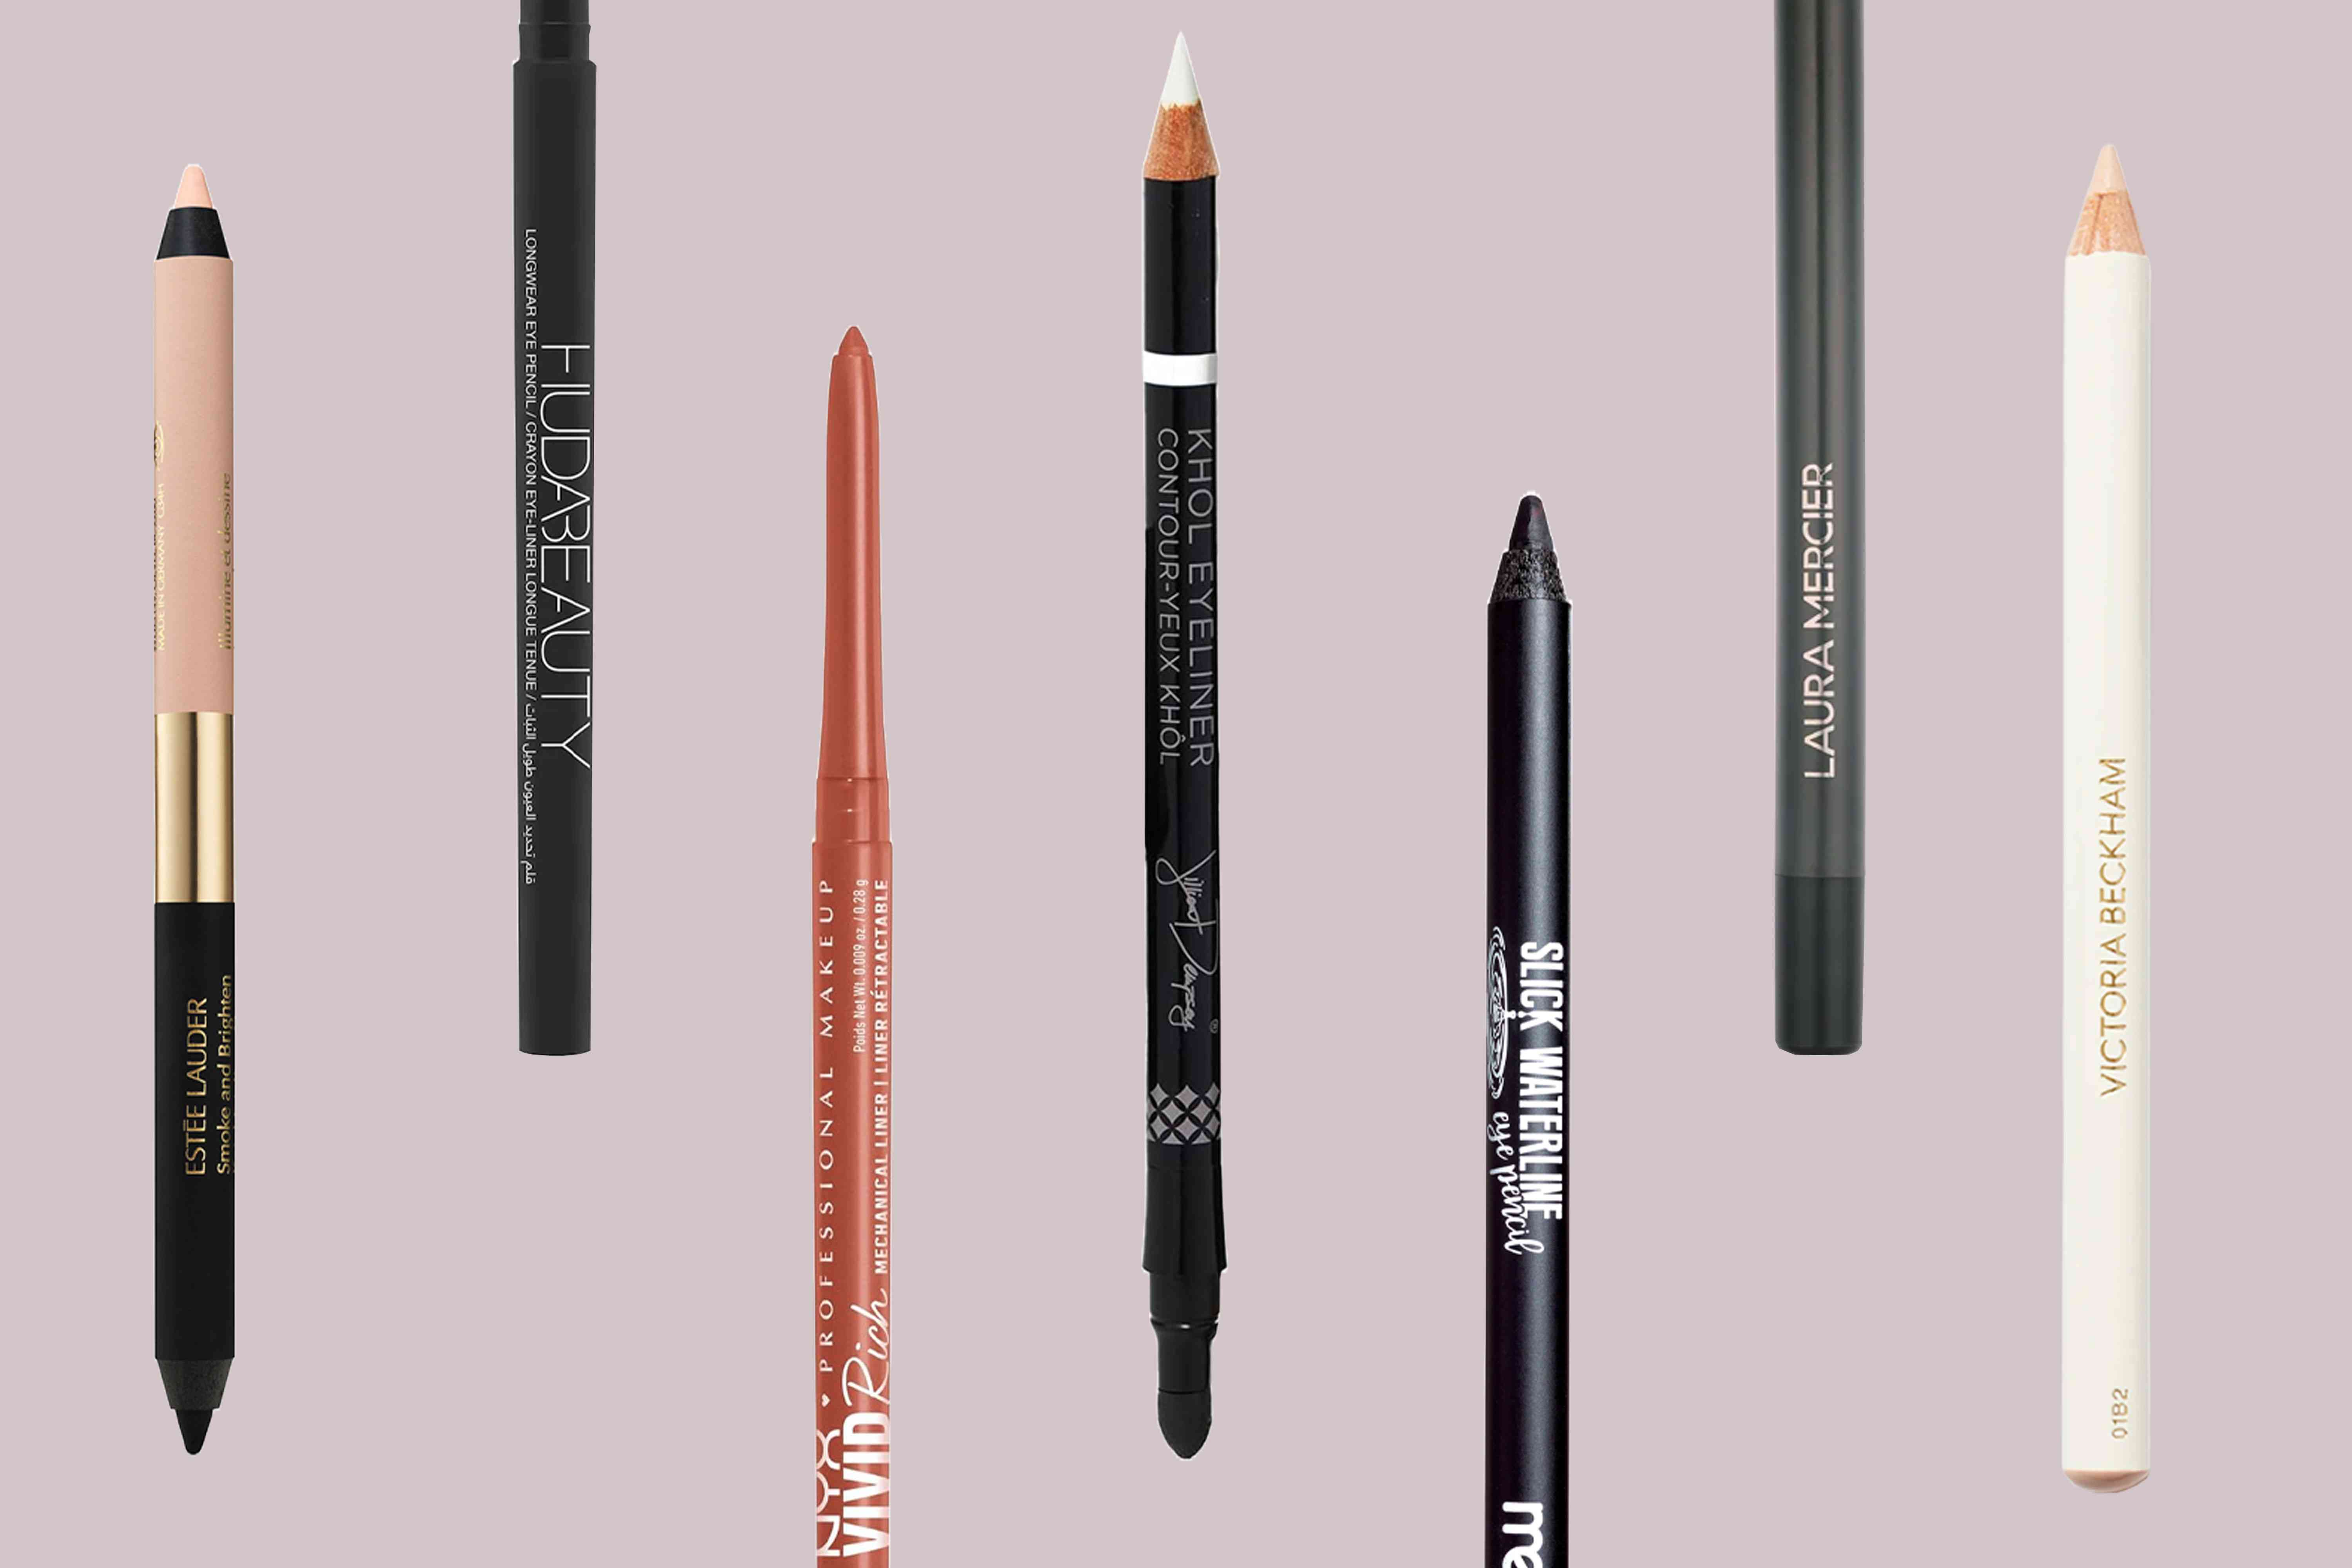 The 17 Best Waterline Eyeliners for Your Sultriest Look